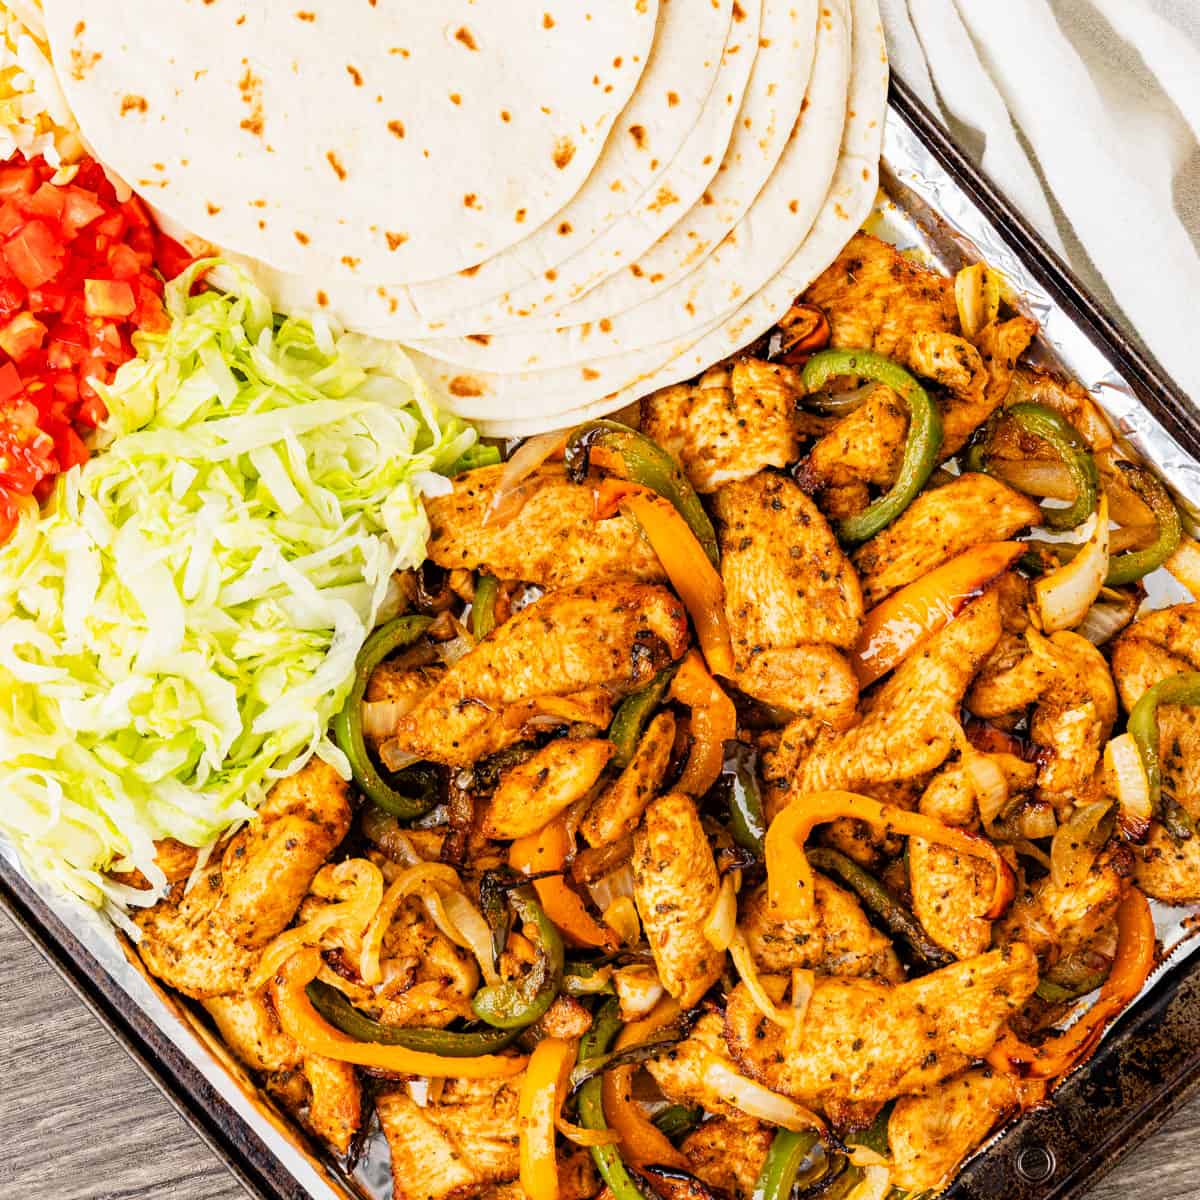 Chicken fajitas served with tortillas lettuce and tomatoes. 